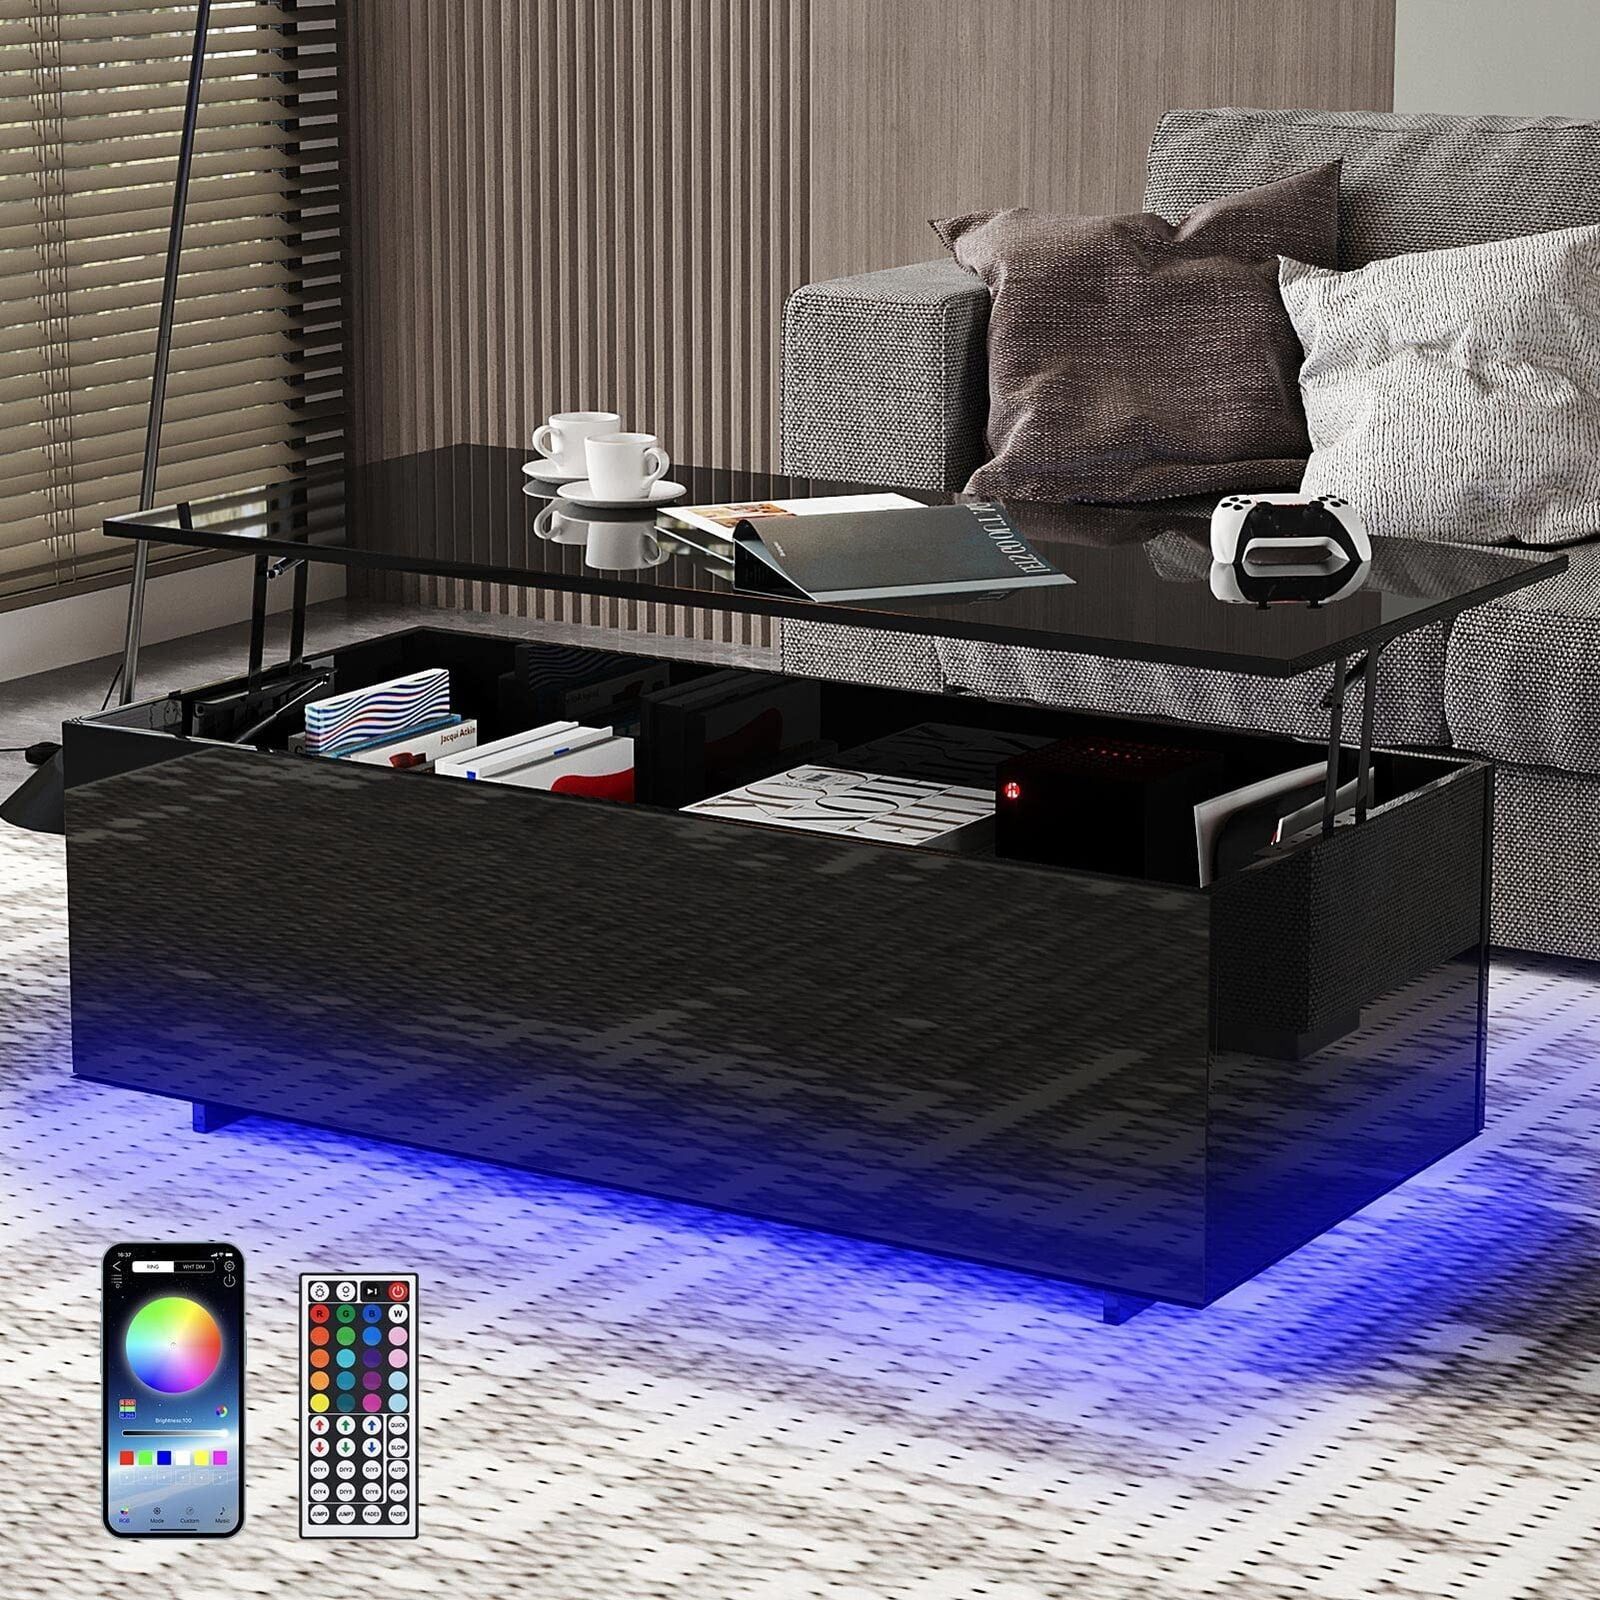 Shiyao 47Inch Modern Led Coffee Tables Lift Top With Storage And Hidden  Compartment, High Glossy Coffee Tables With 20 Colors Led Light –  Walmart For High Gloss Lift Top Coffee Tables (View 6 of 15)